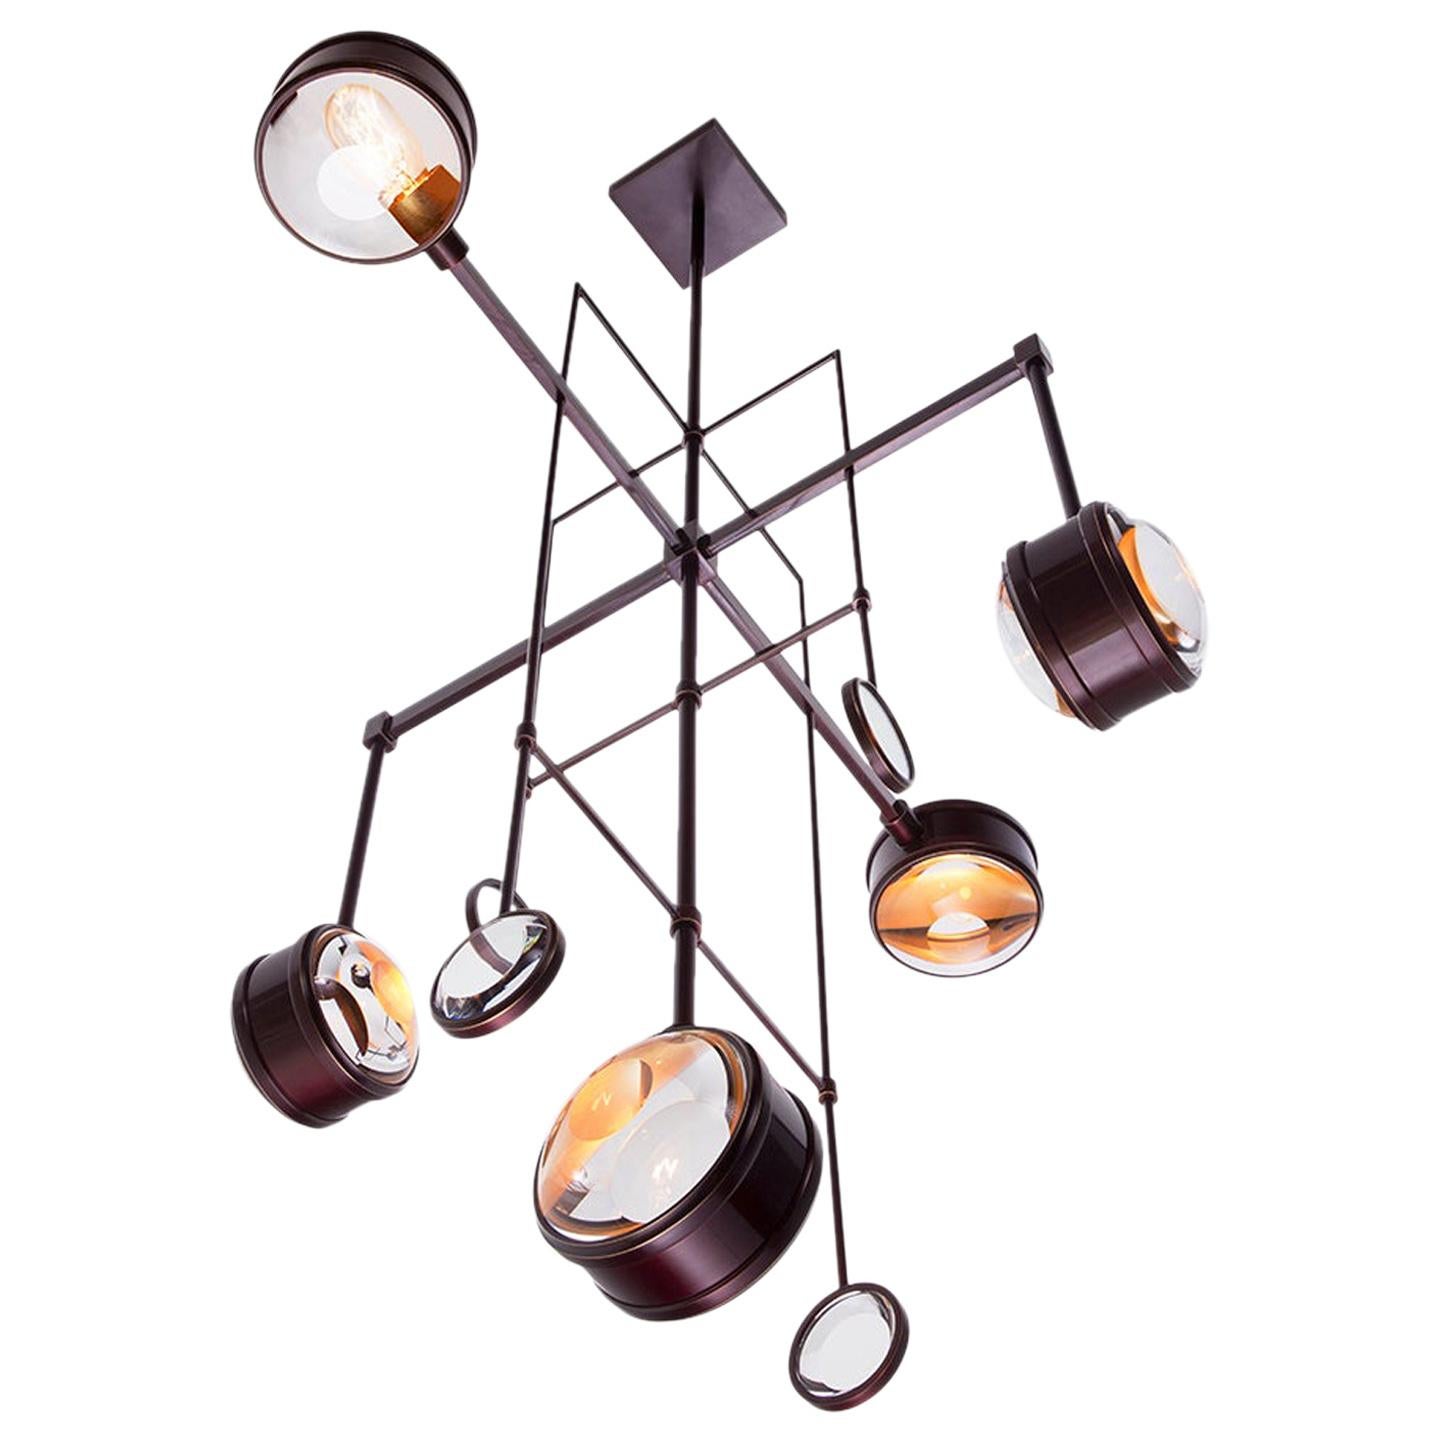 HOLLY HUNT Lyra Chandelier No. 5 in Oxblood Lacquer by Alison Berger  Glassworks at 1stDibs